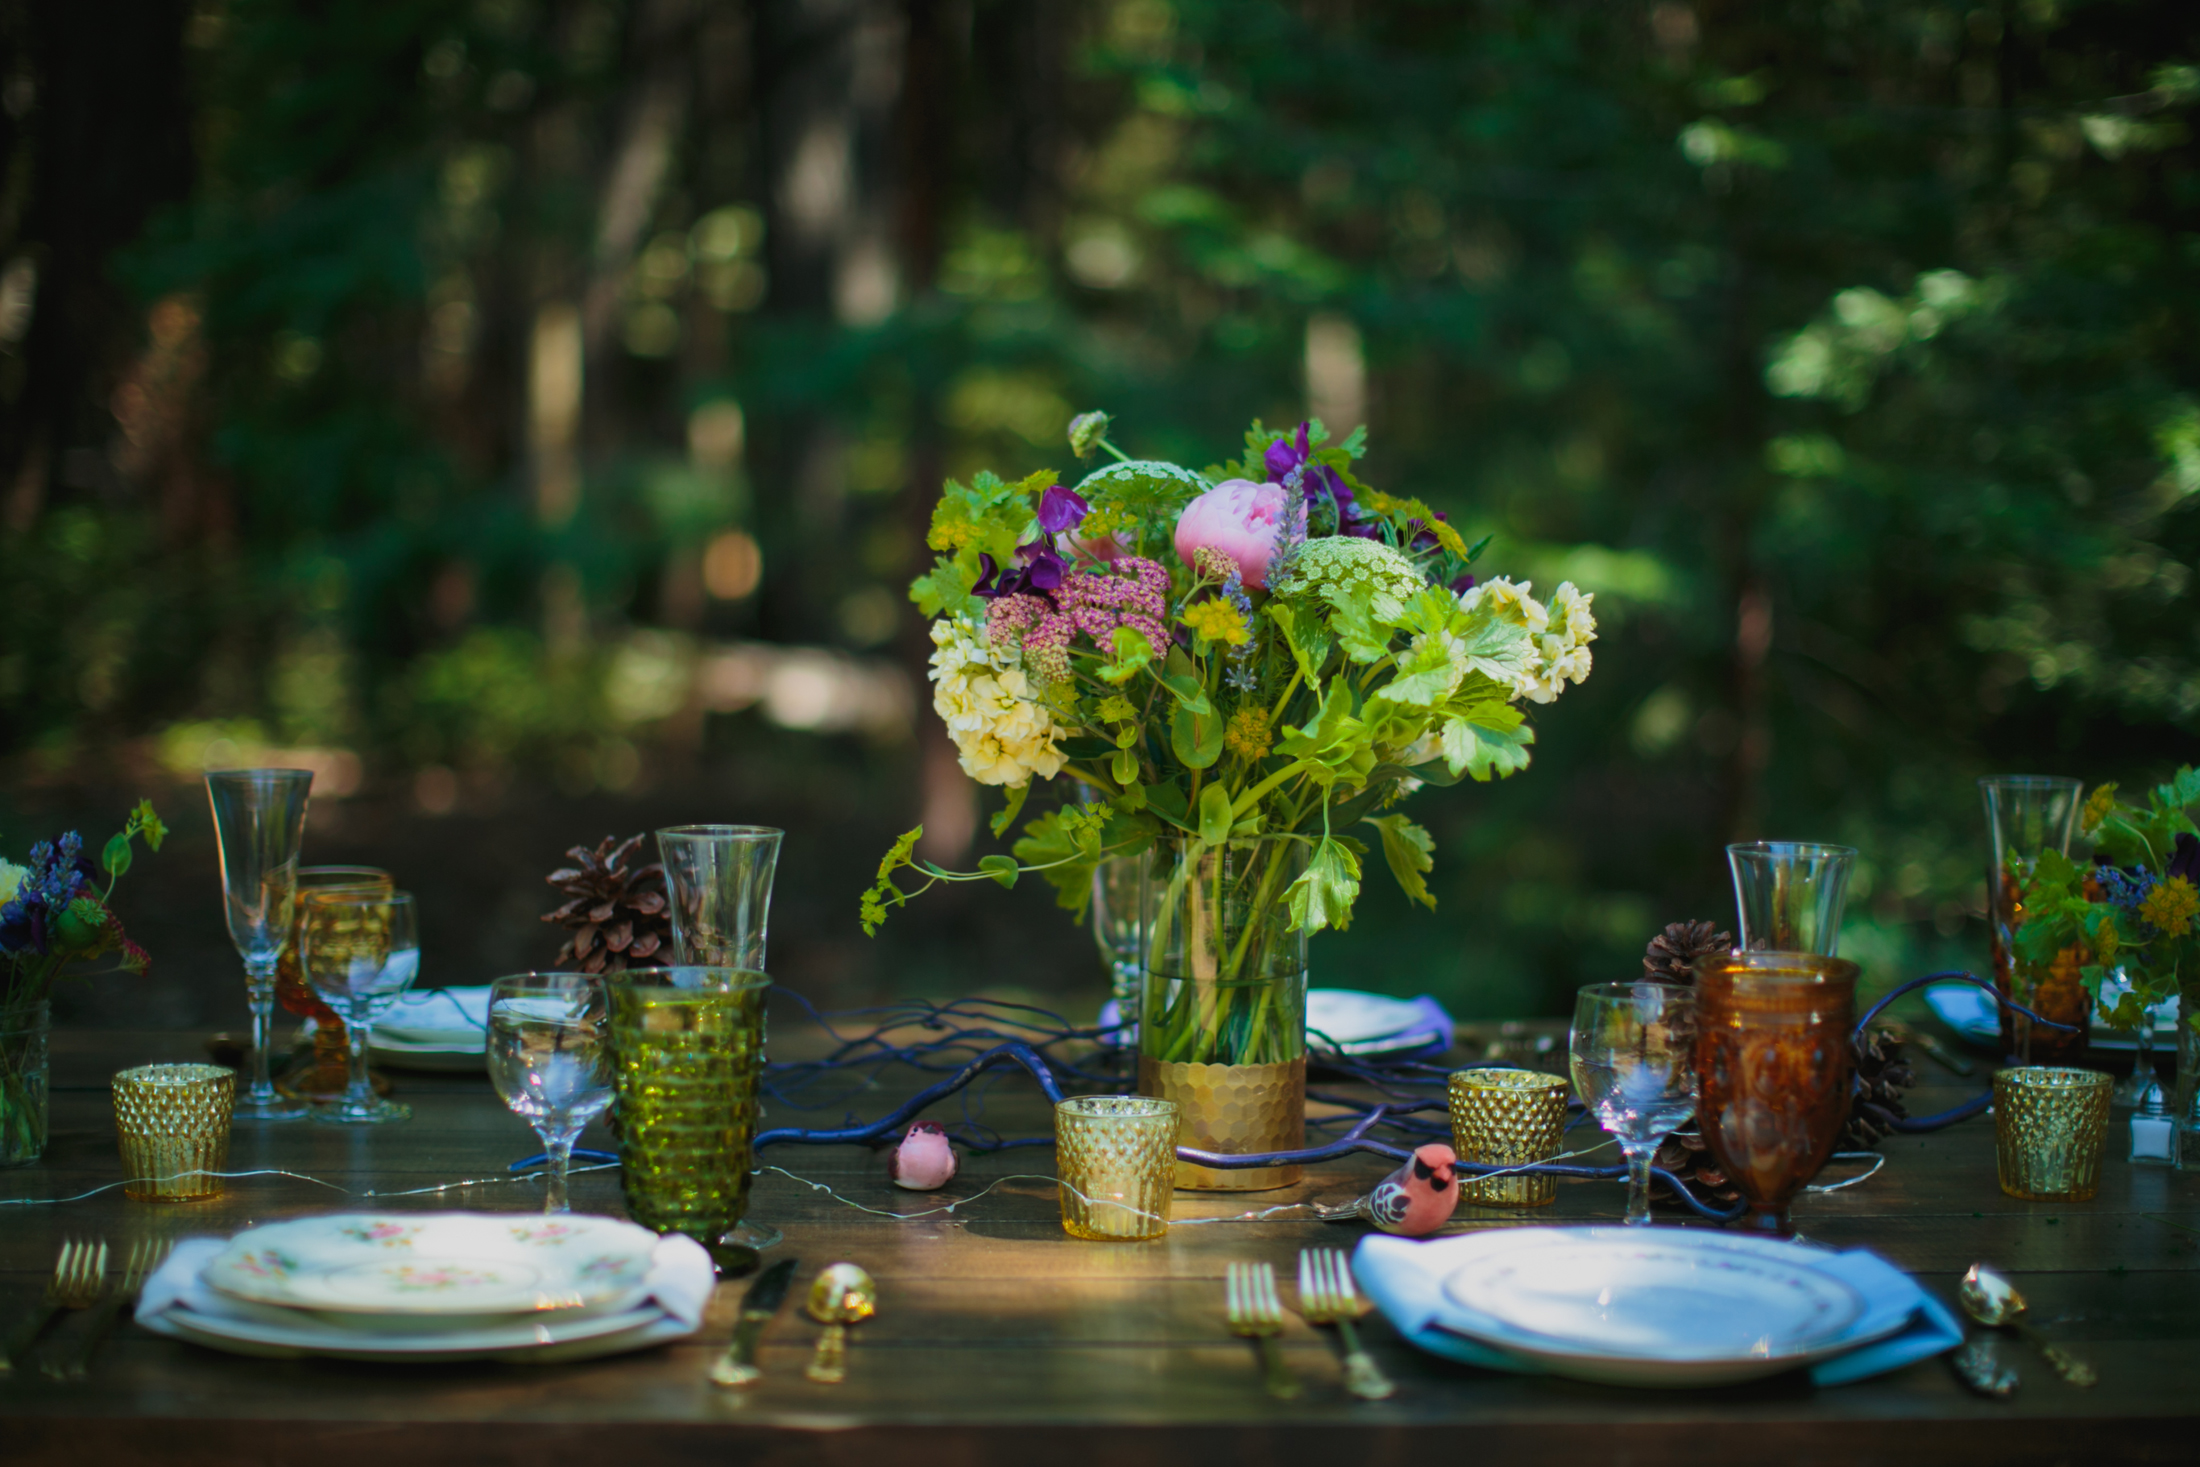 The table scape of flowers, mismatched glassware, vintage plates and pinecones.